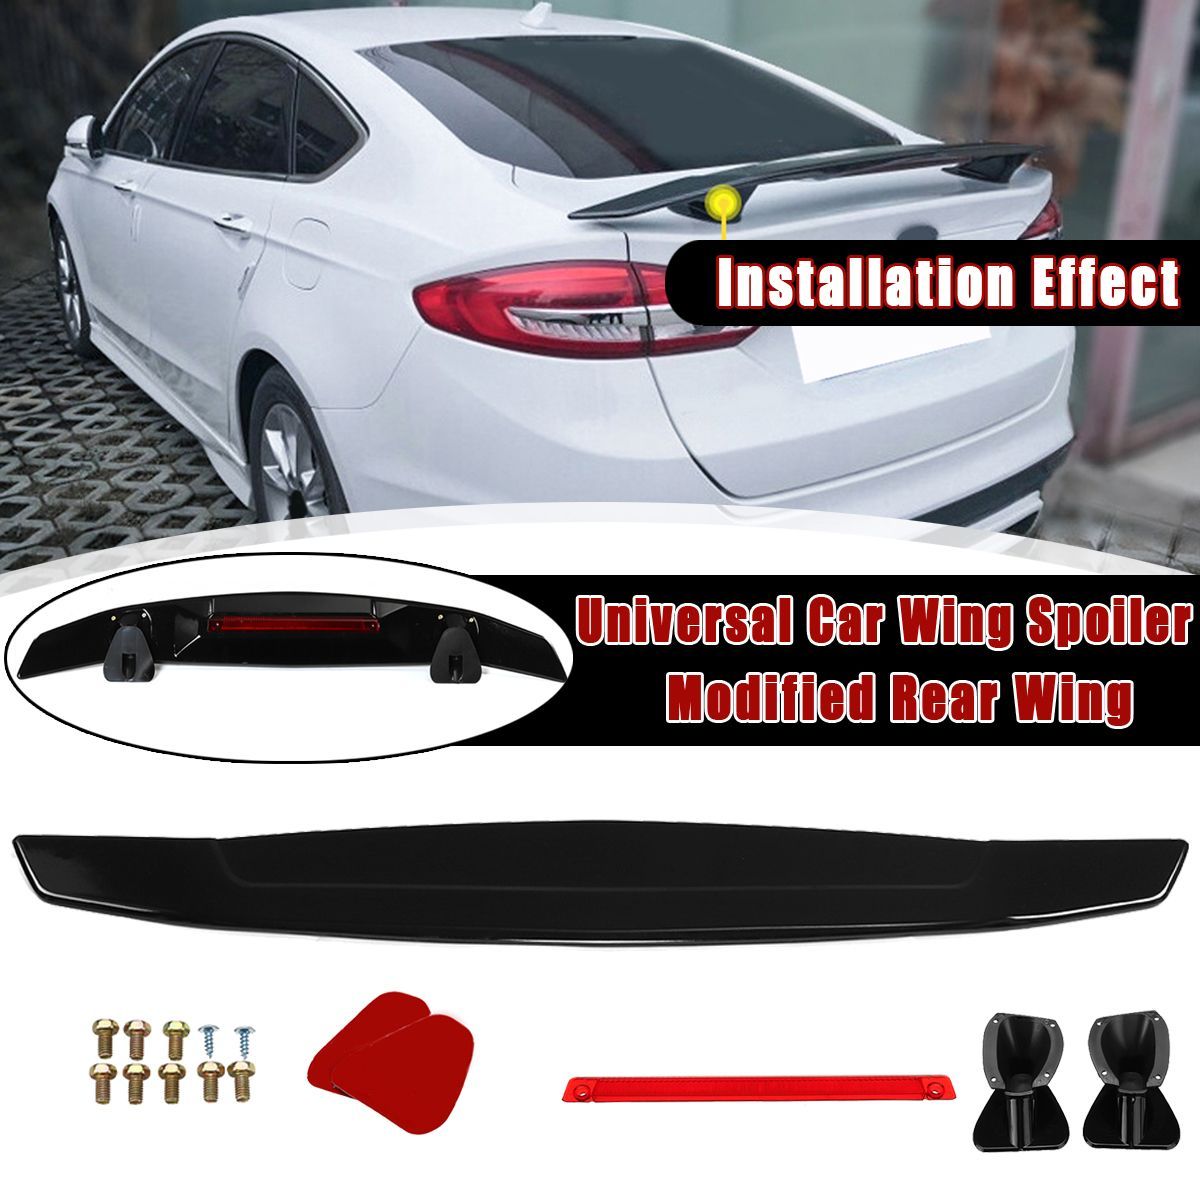 Universal-Perforated-Sedan-Car-Sports-Tail-Fixed-Spoiler-Wing-Car-Modified-Rear-Wing-Brilliant-Black-1608466